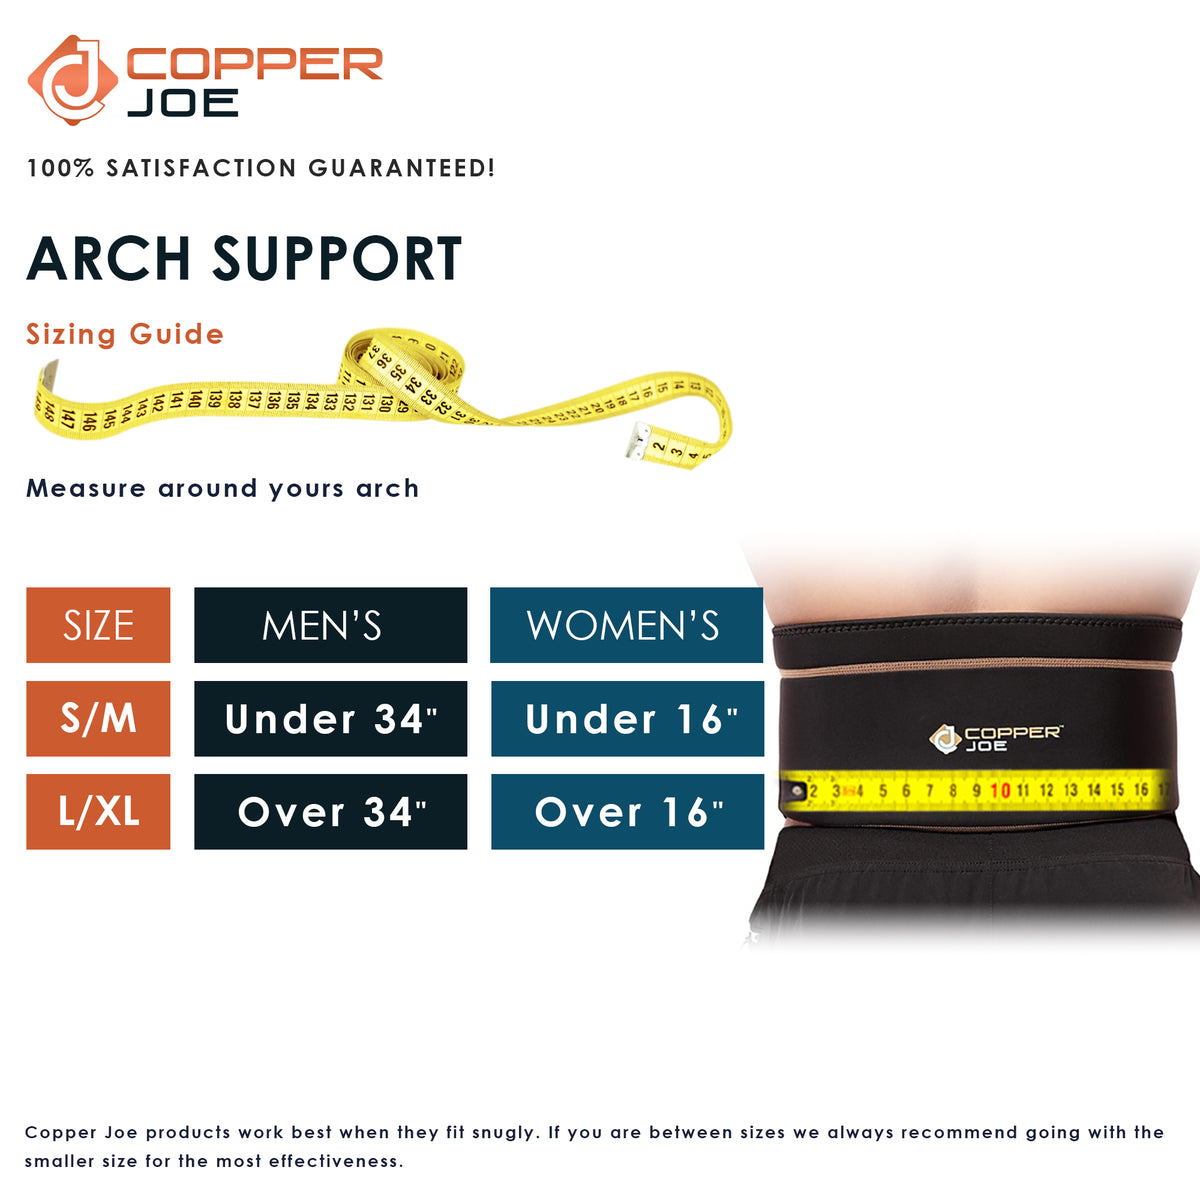 Copper Joe Back Brace for Lower Back Pain Relief, Back Support